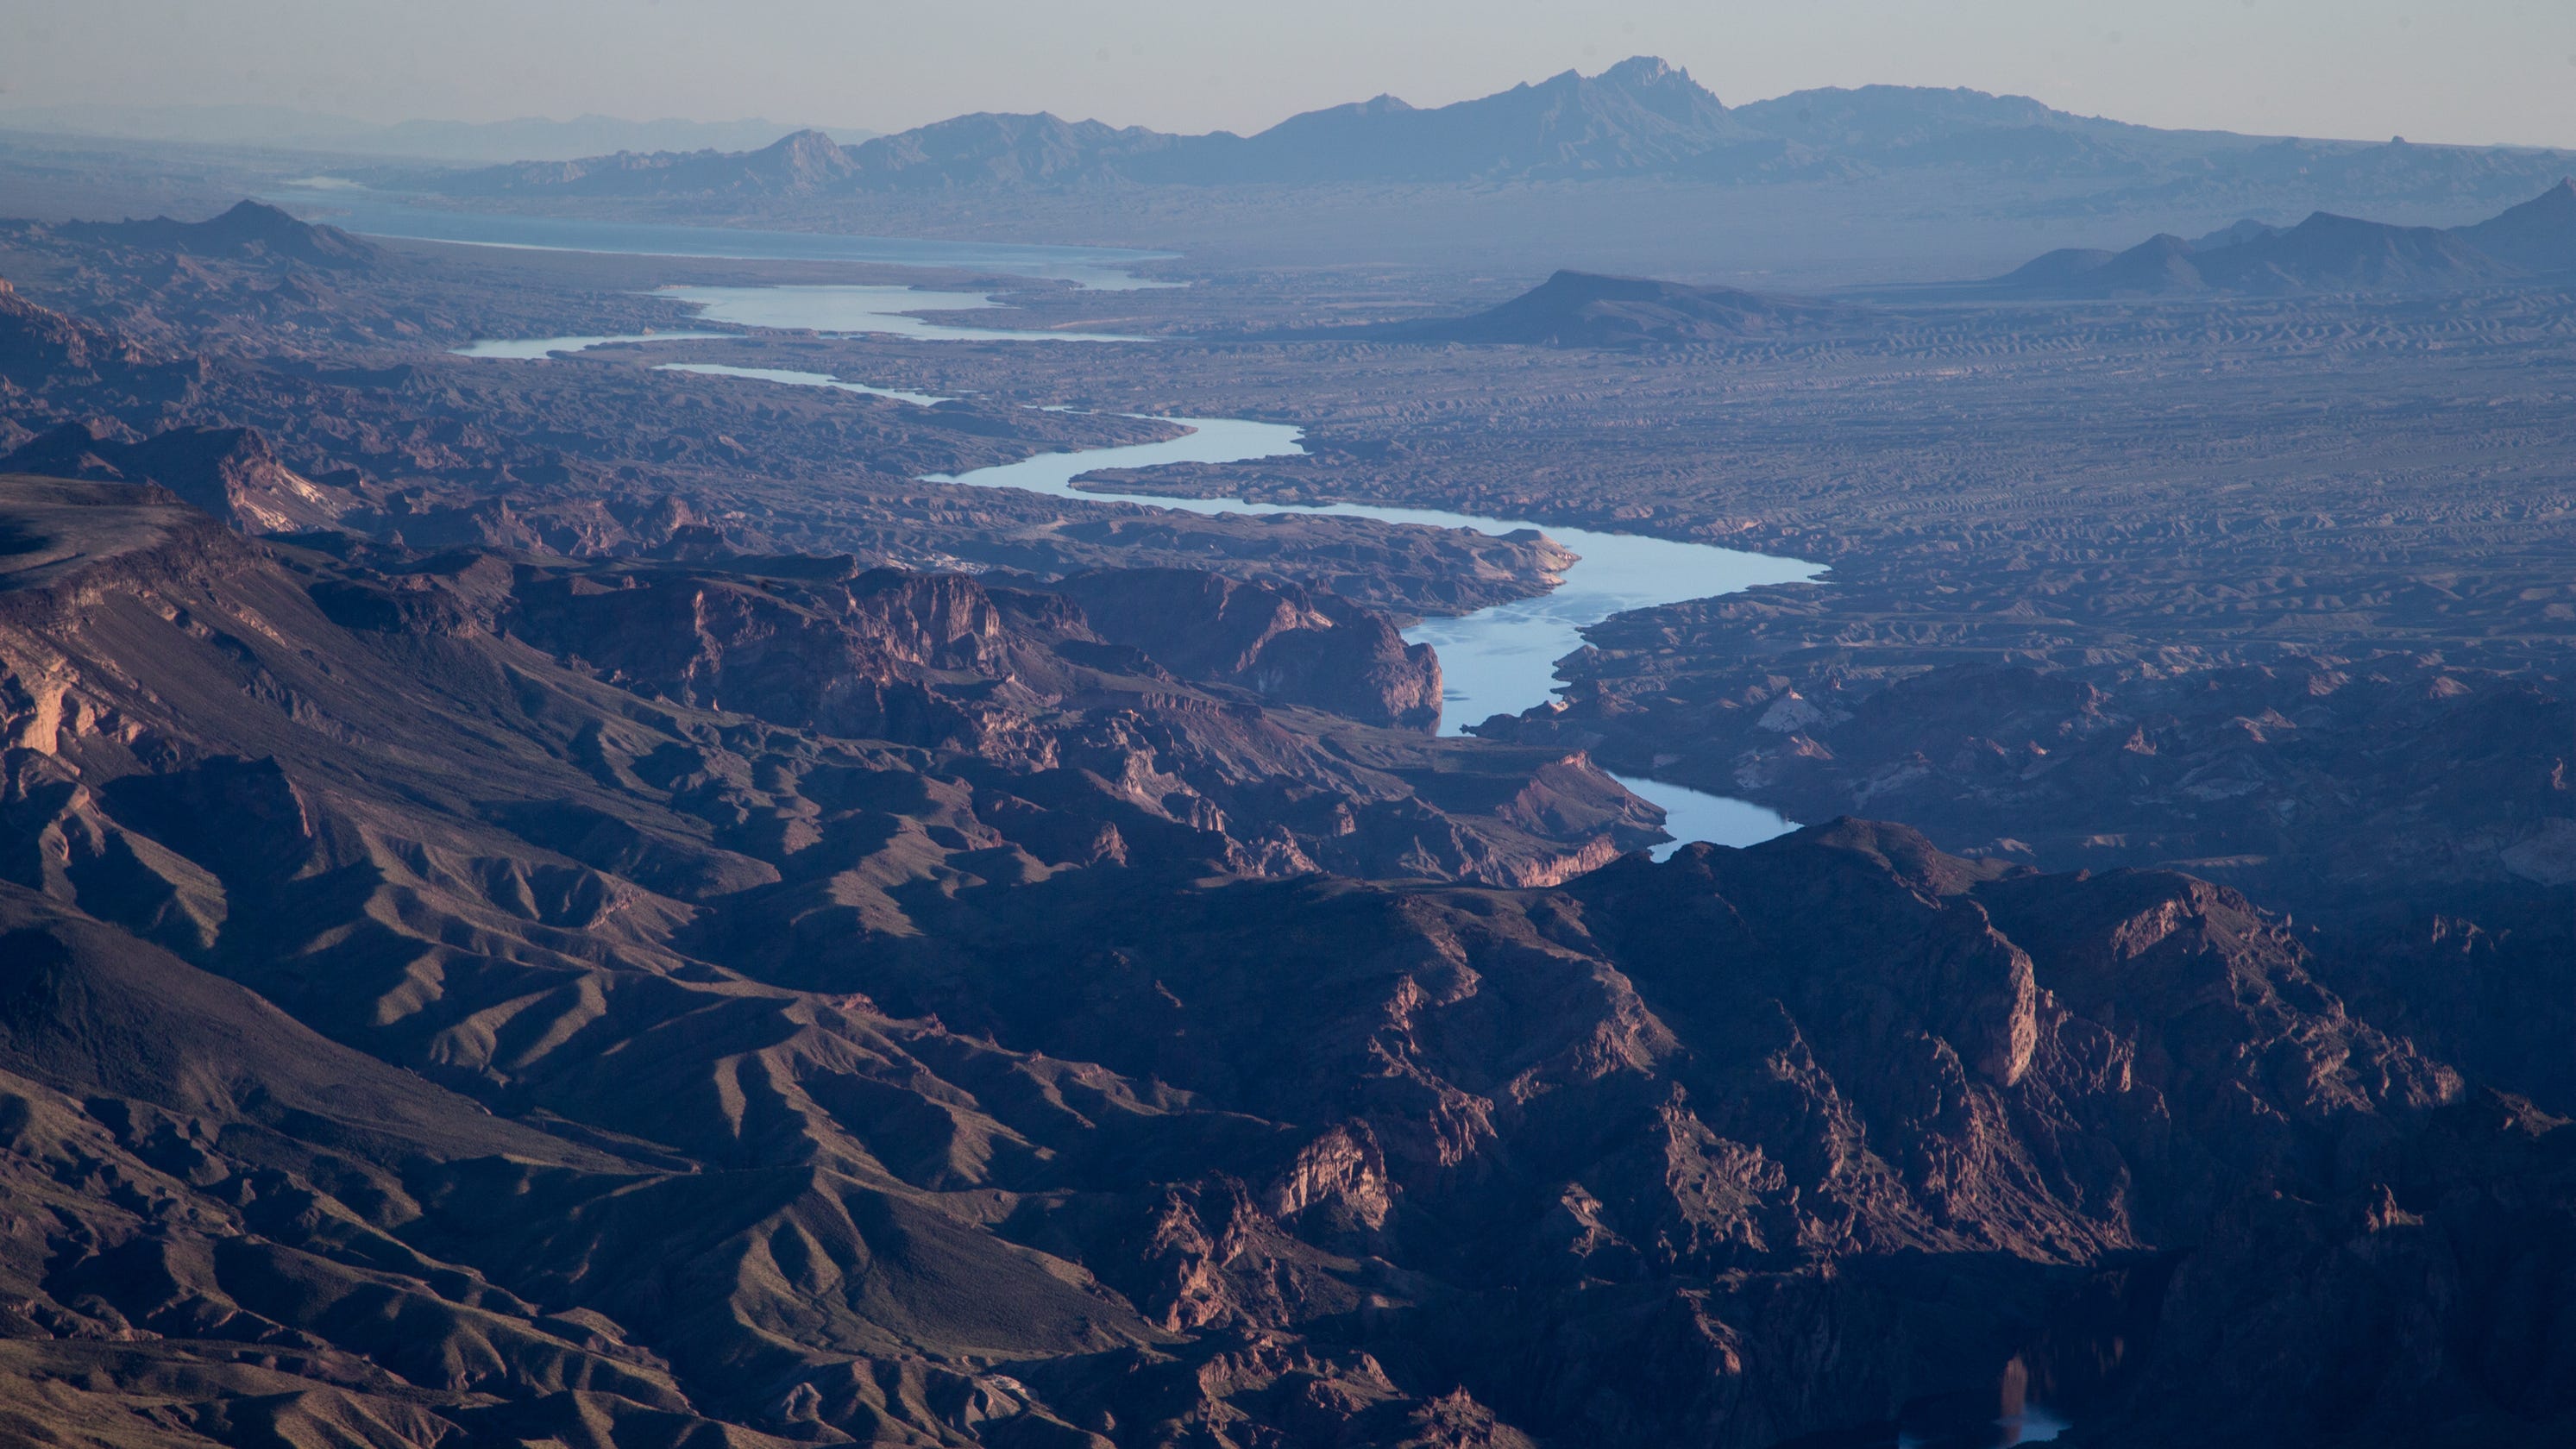 Rising temperatures are taking a worsening toll on the Colorado River, study finds - AZCentral